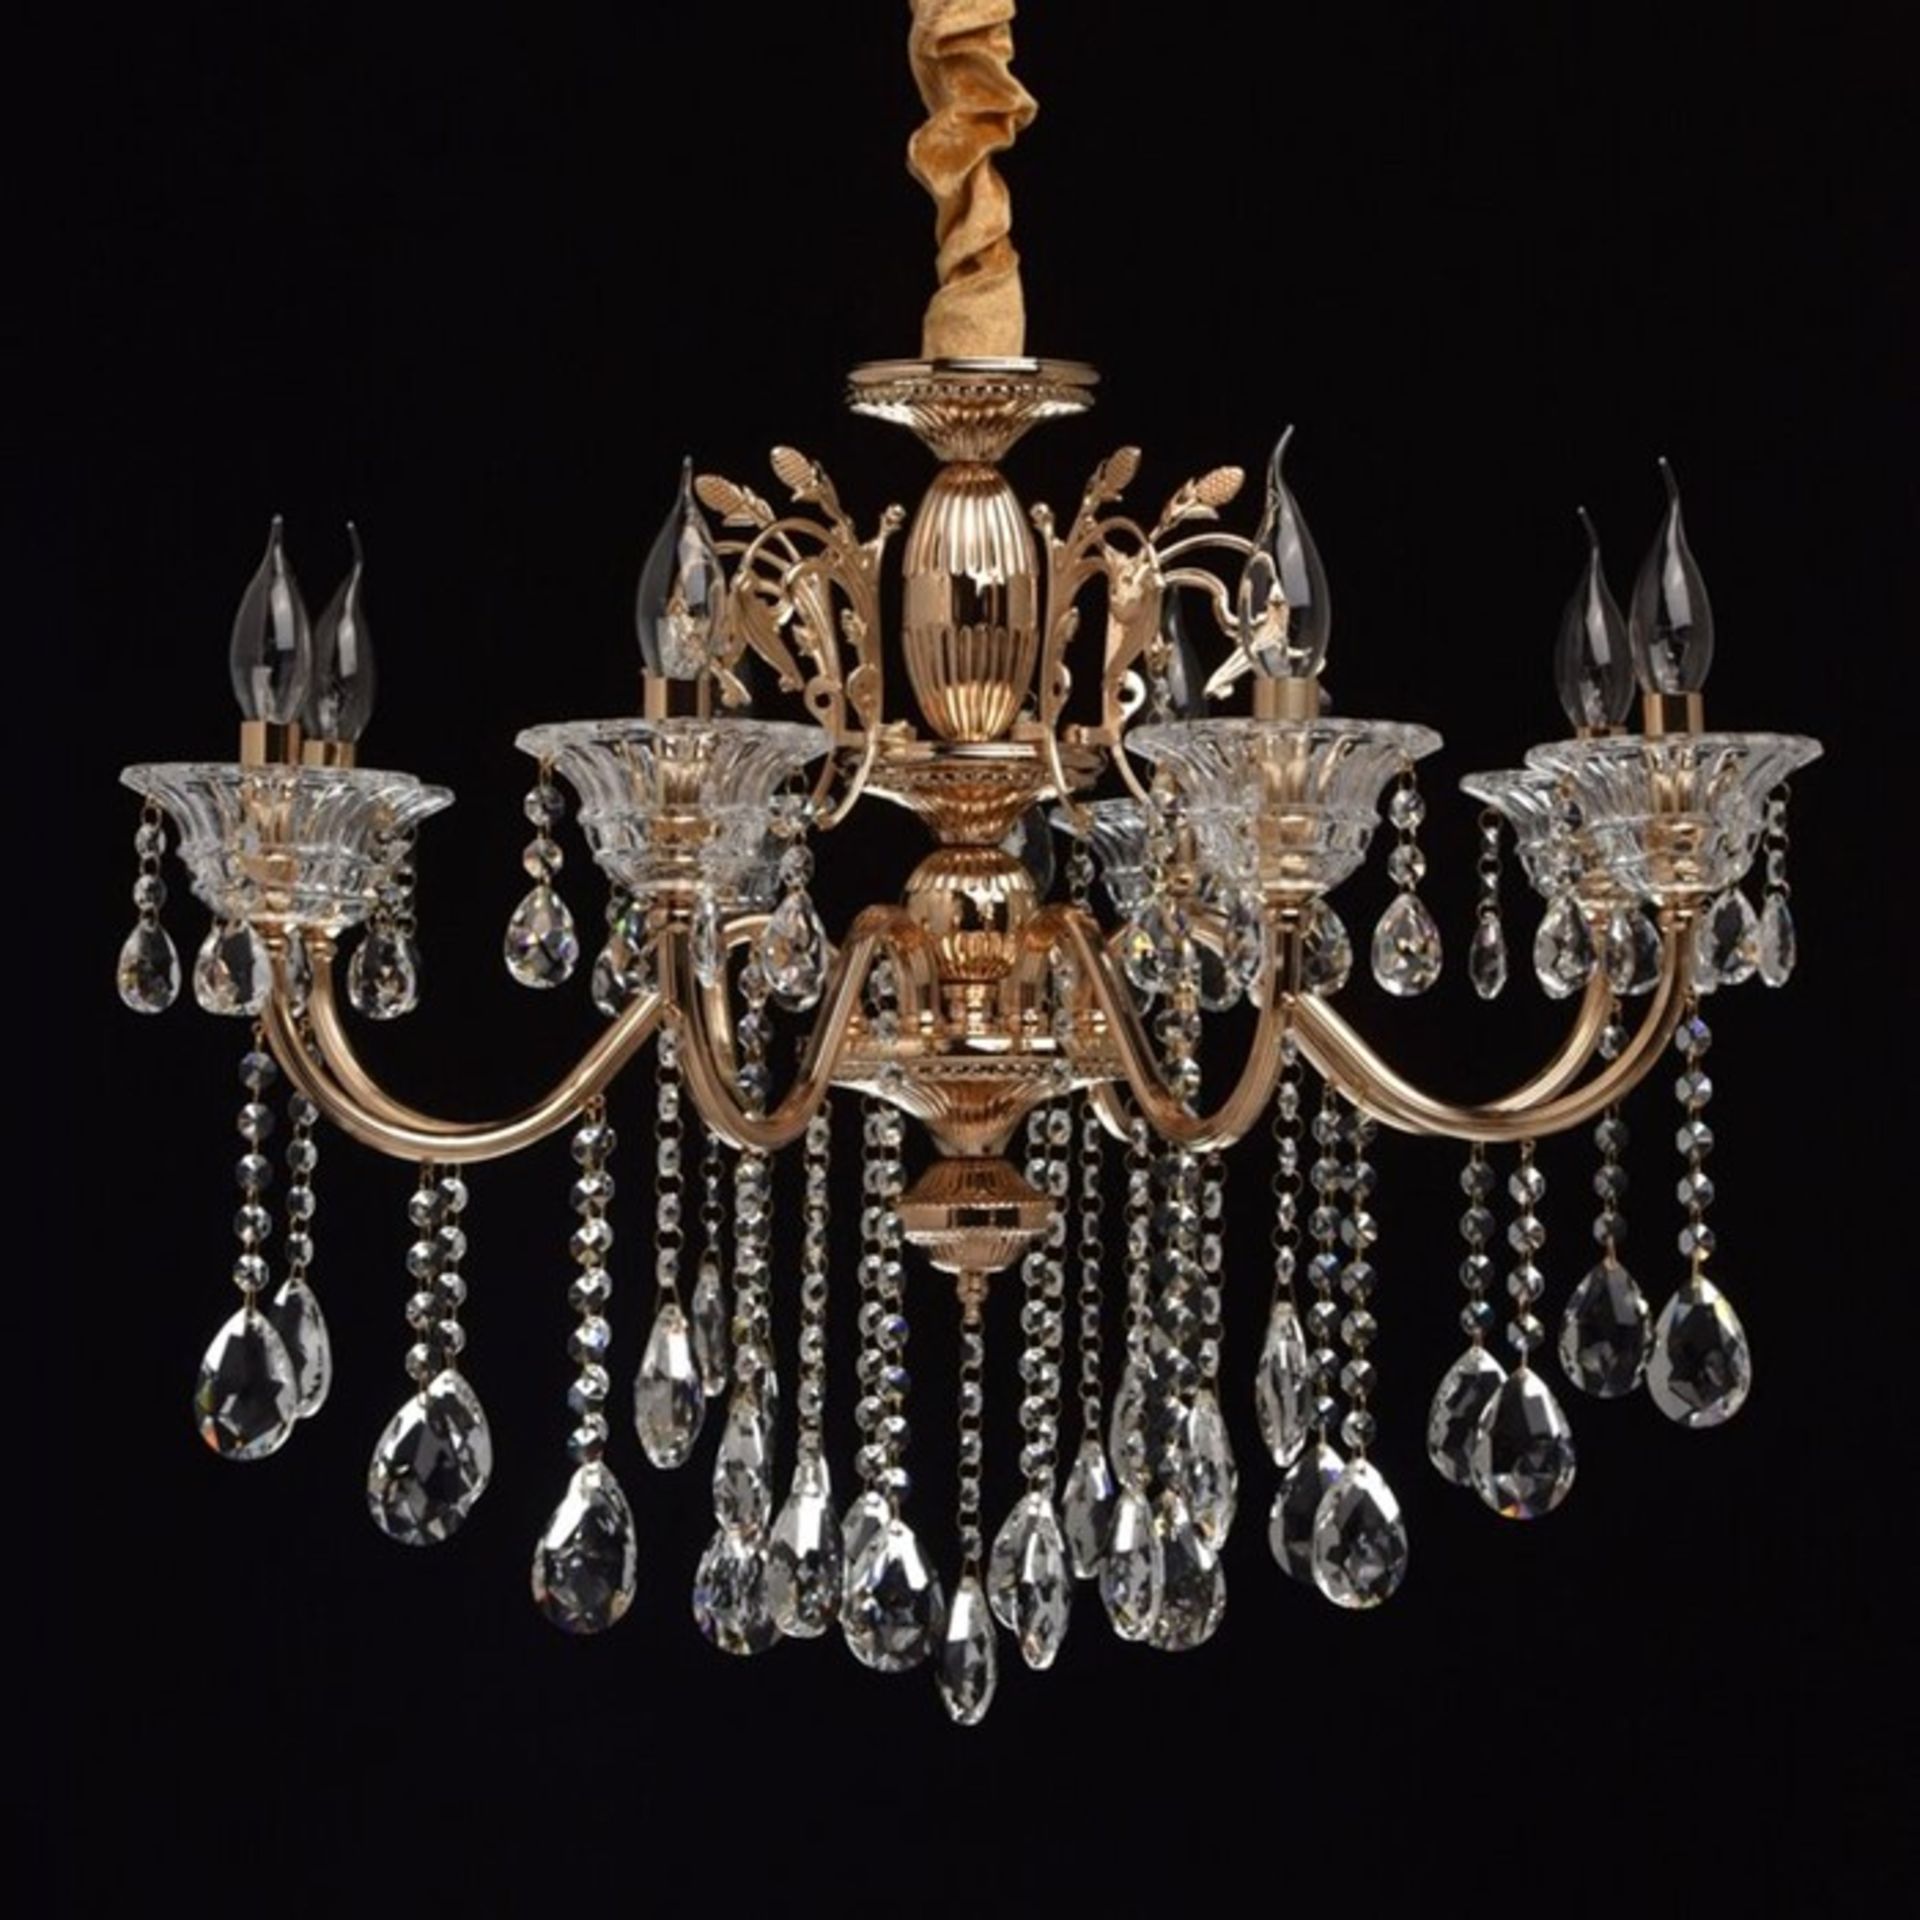 Home Loft Concept, 8-Light Candle-Style Chandelier - RRP £207.99 (HECO8914 - 16208/1) 6F